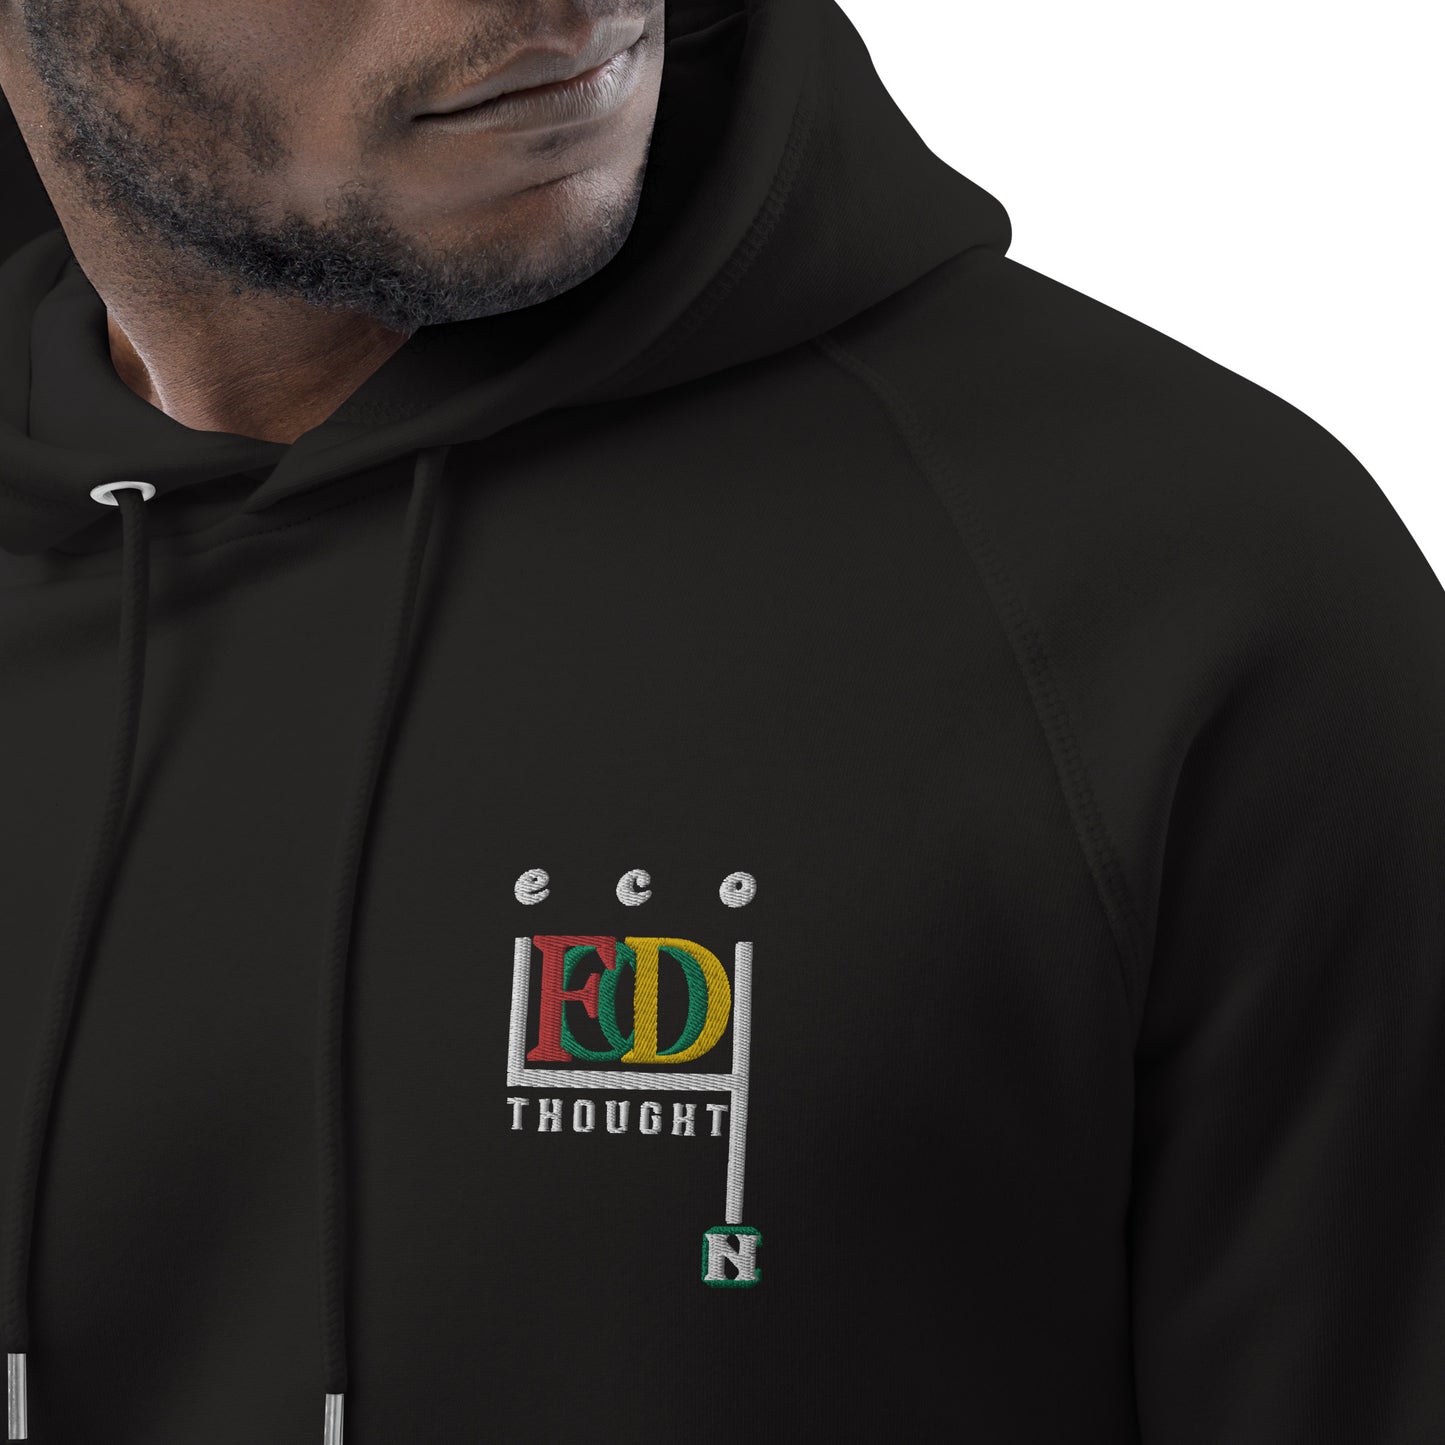 Food for thought - Eco hoodie - Unisex pullover hoodie